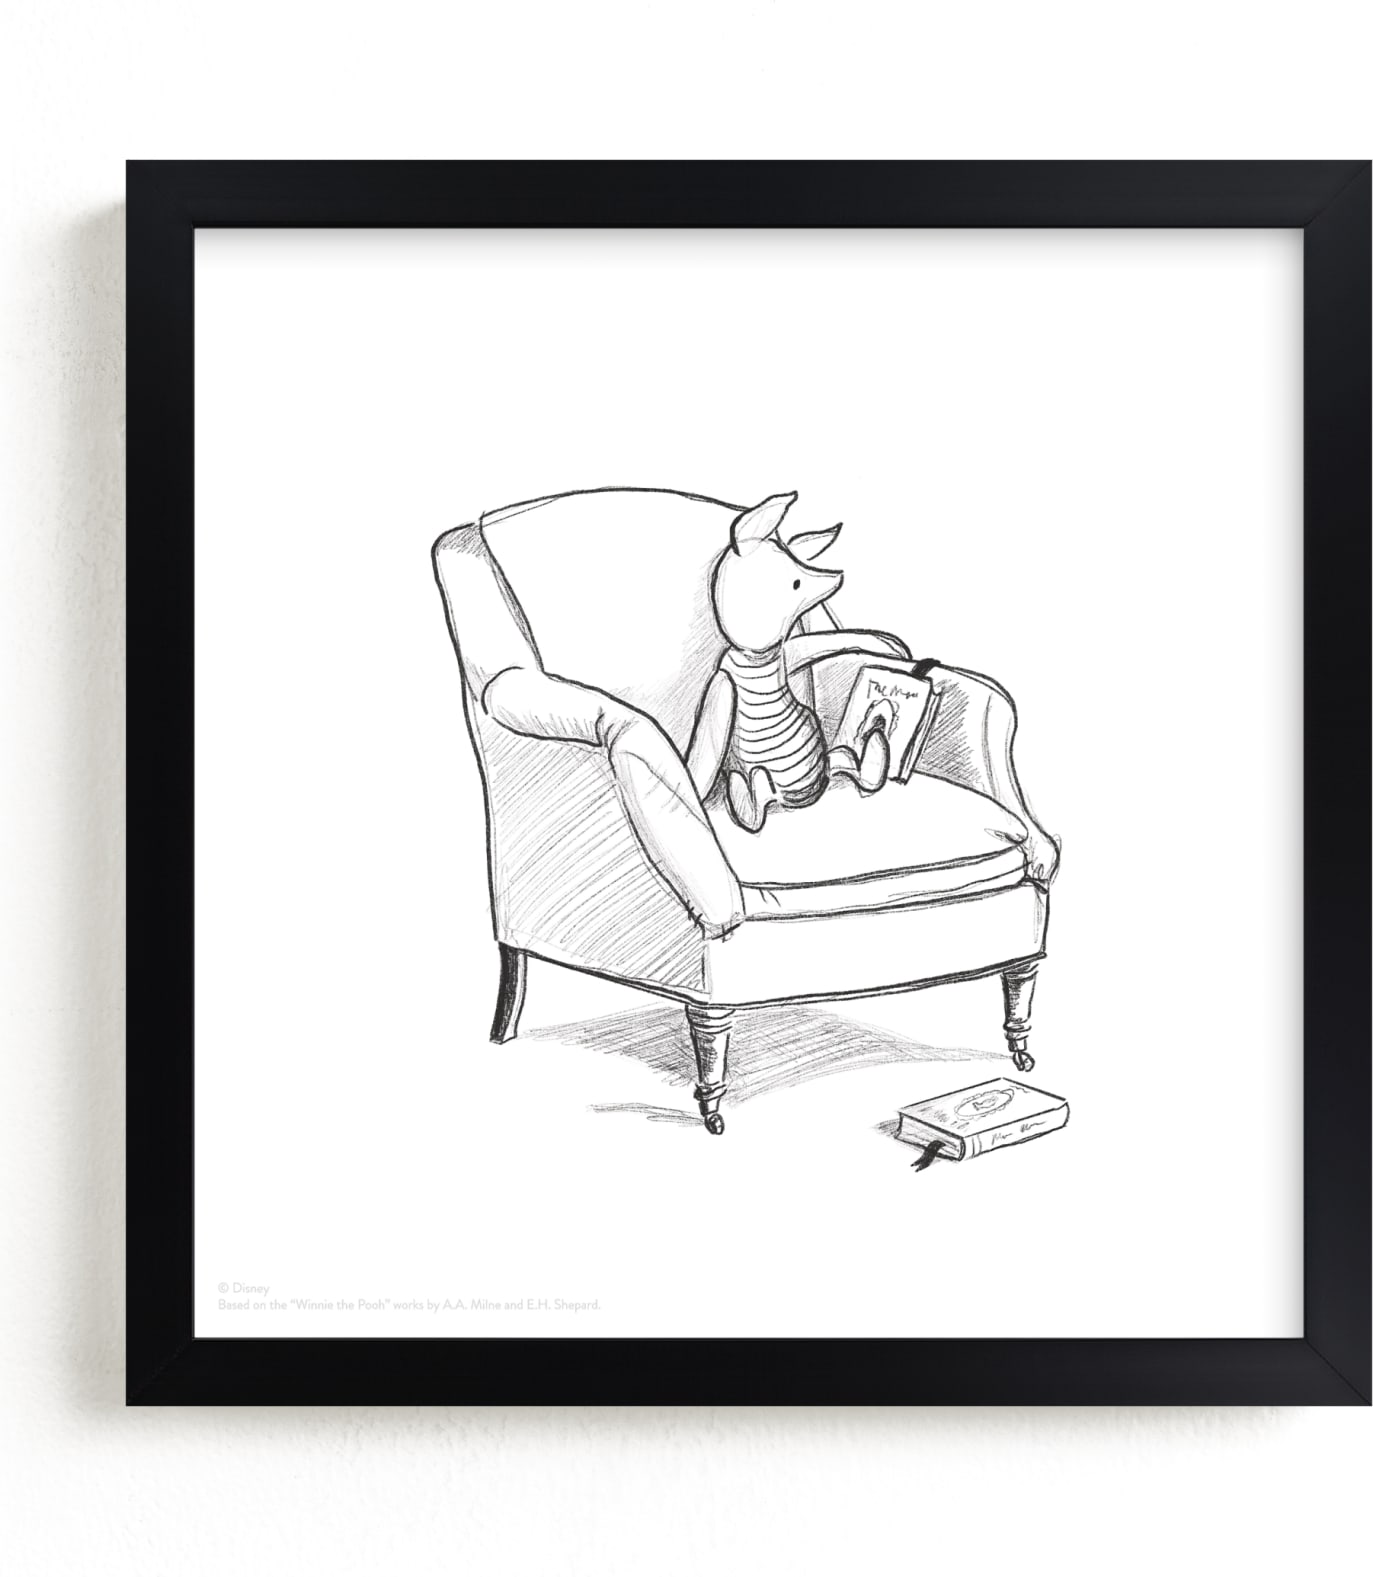 This is a black and white disney art by Stefanie Lane called Piglet Lounging from Disney's Winnie The Pooh.